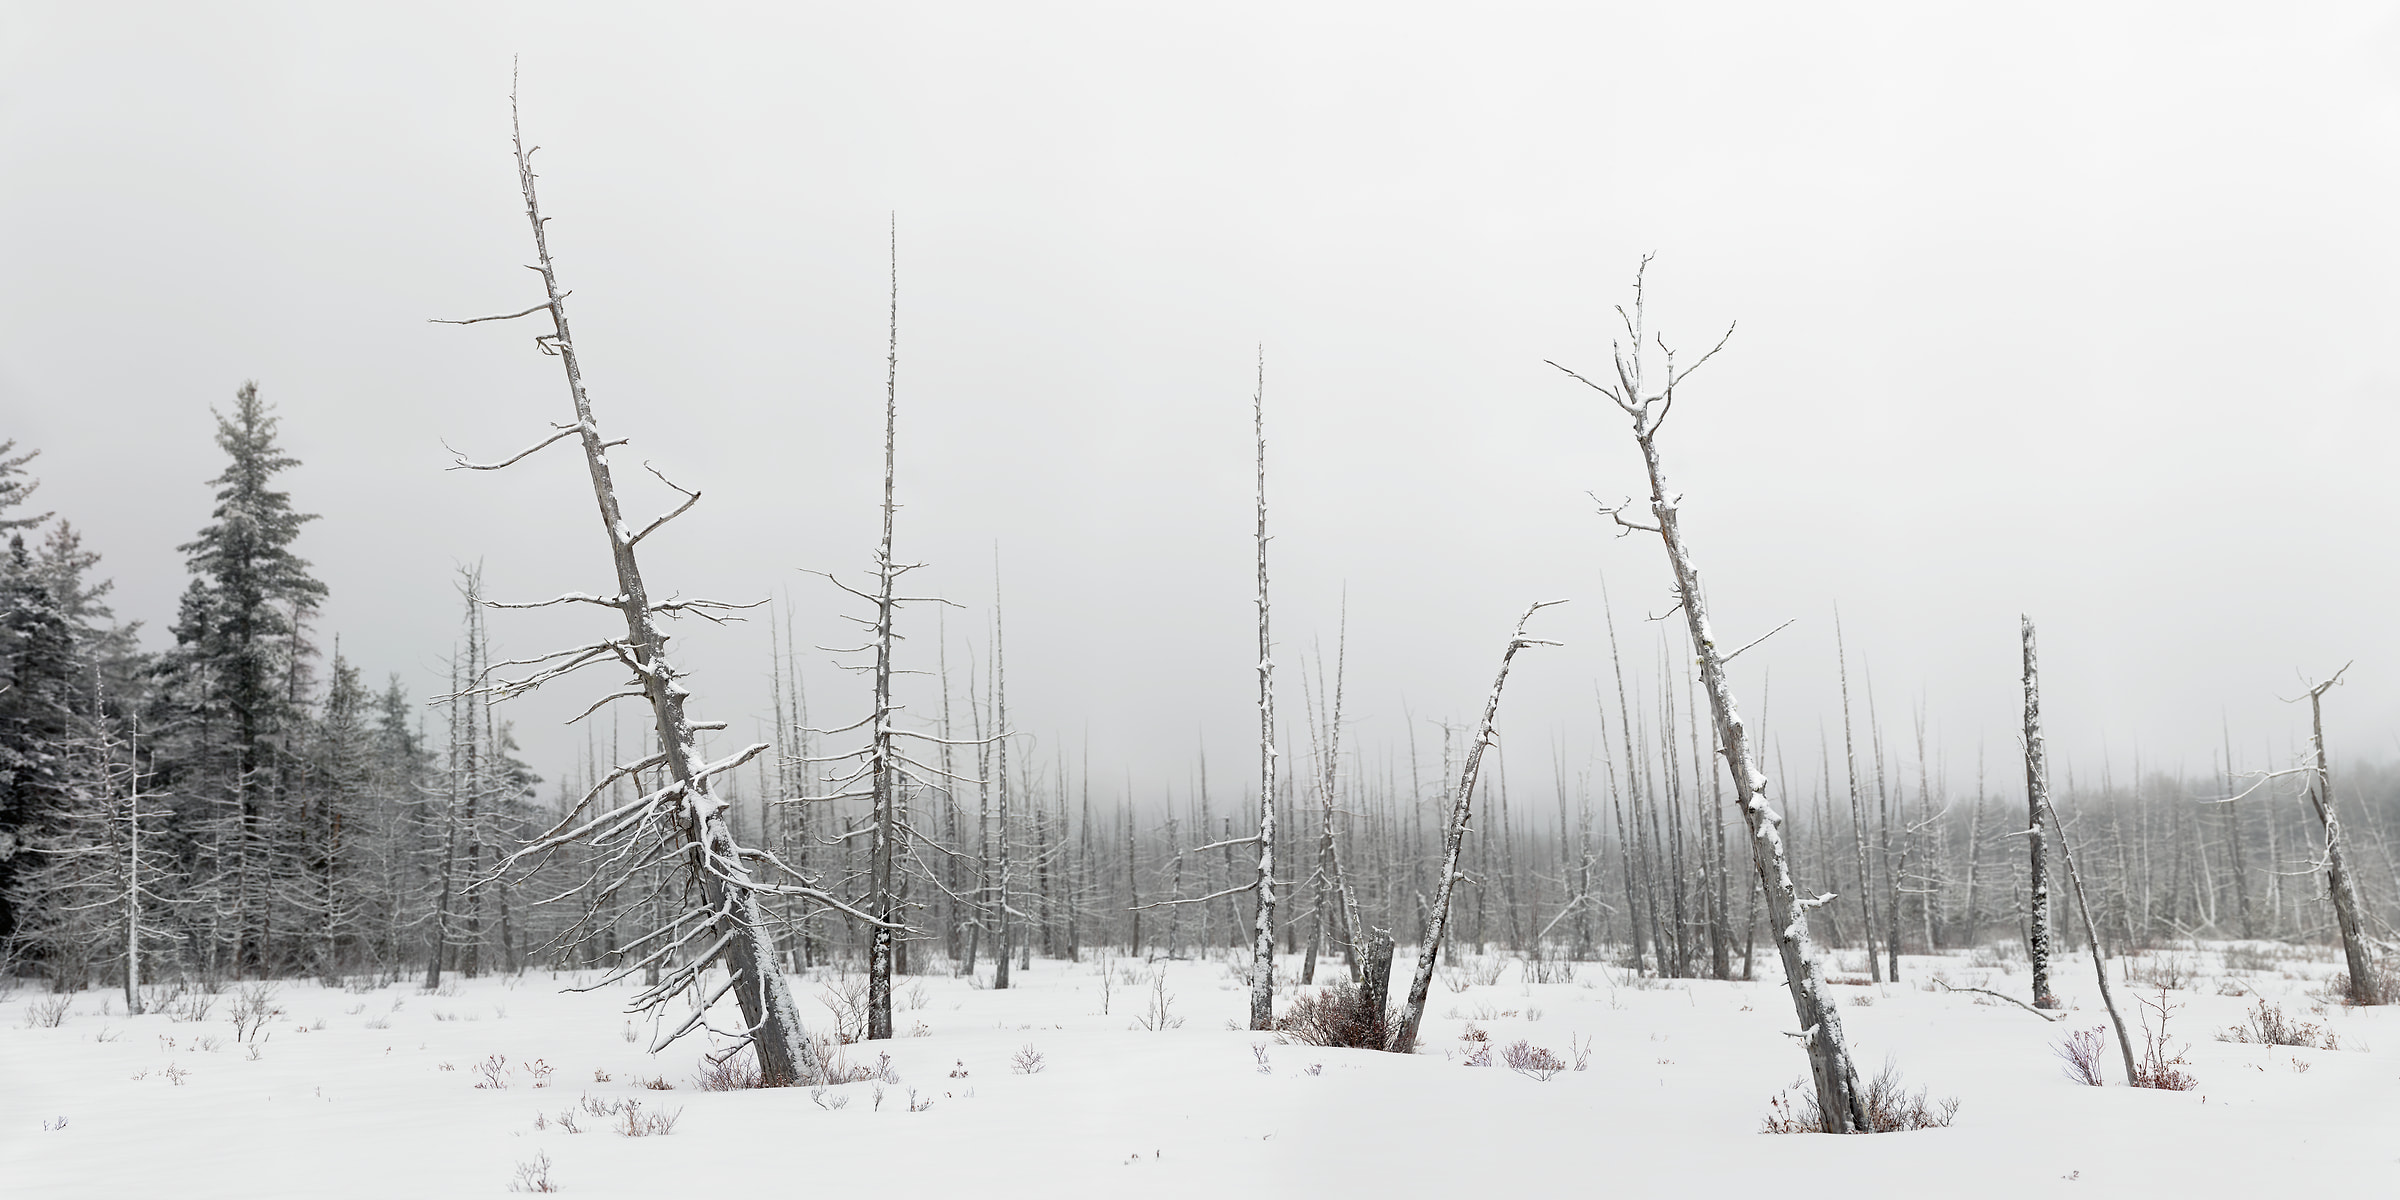 1,242 megapixels! A very high resolution, large-format photo print of a winter forest scene with barren trees; fine art nature photograph created by Aaron Priest on Golden Road in Millinocket, Maine.